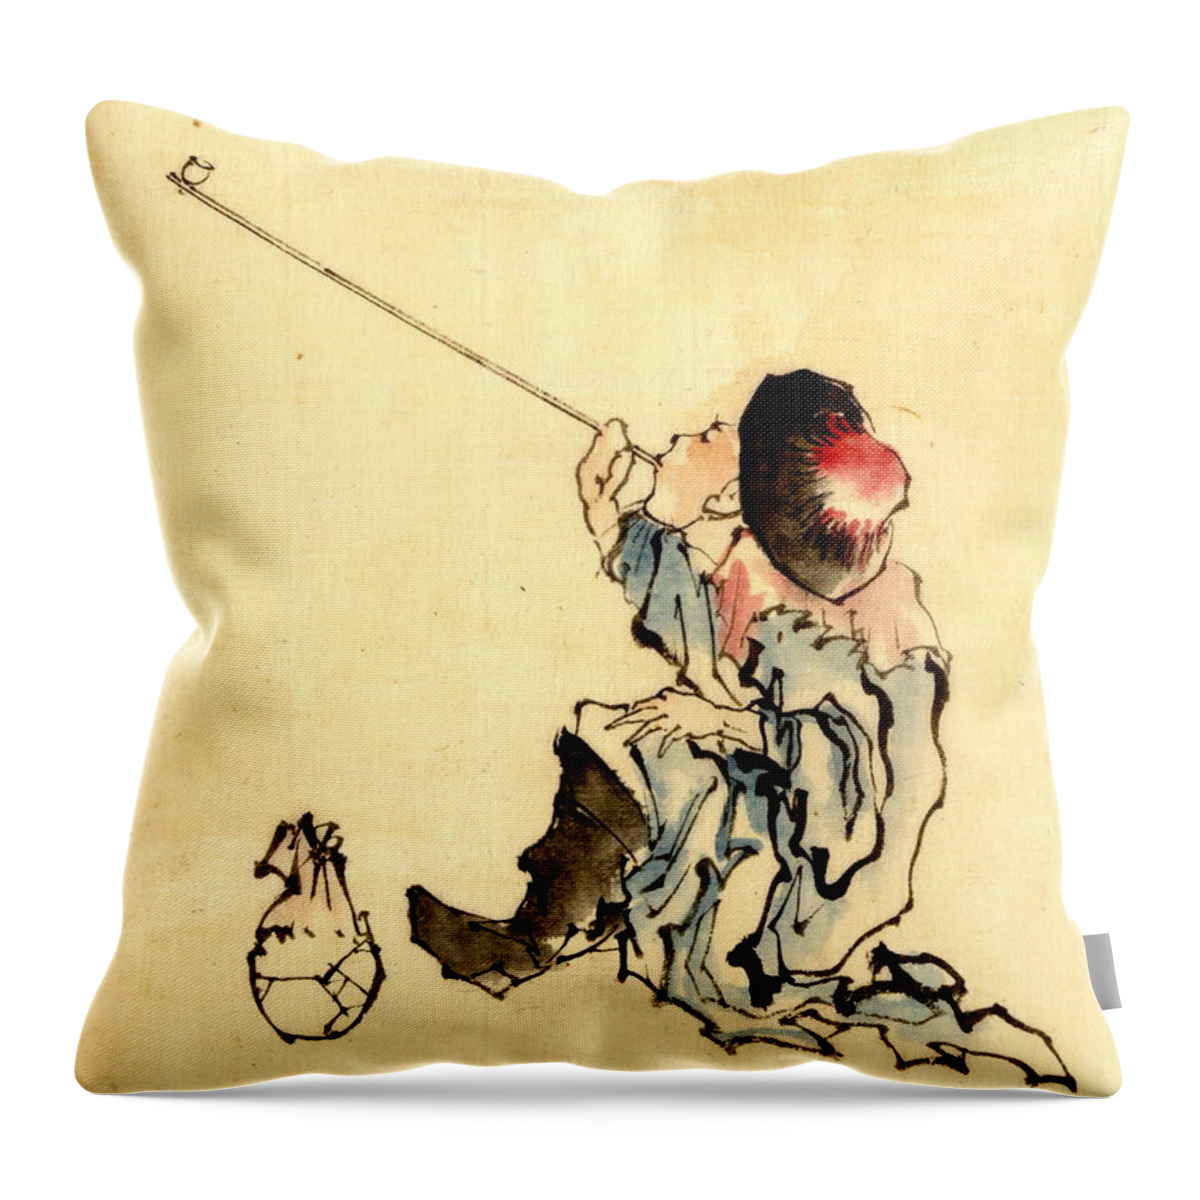 Pipe Smoker 1840 Throw Pillow featuring the photograph Pipe Smoker 1840 by Padre Art